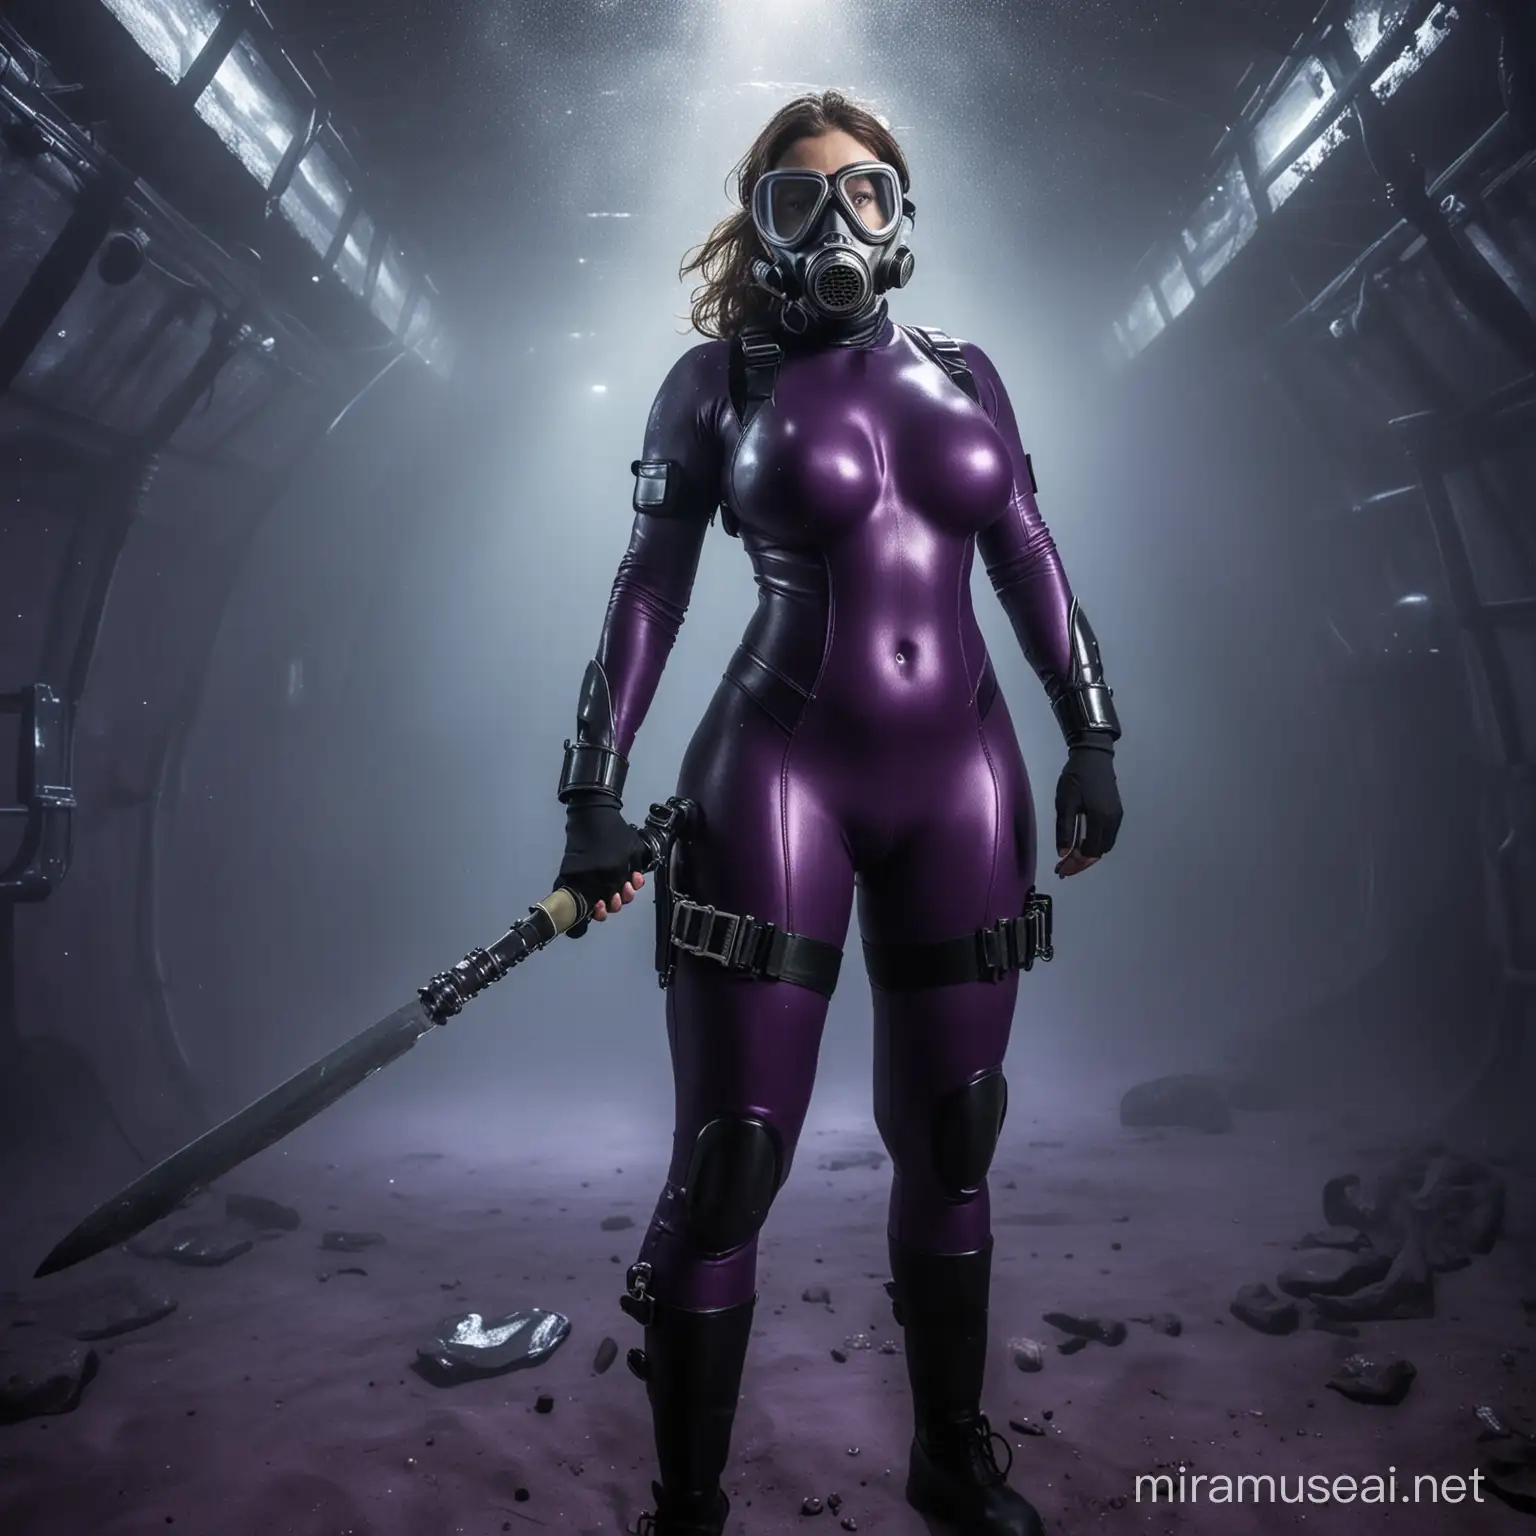 Seductive Scuba Diver in Purple Spandex with Gas Mask and Knife